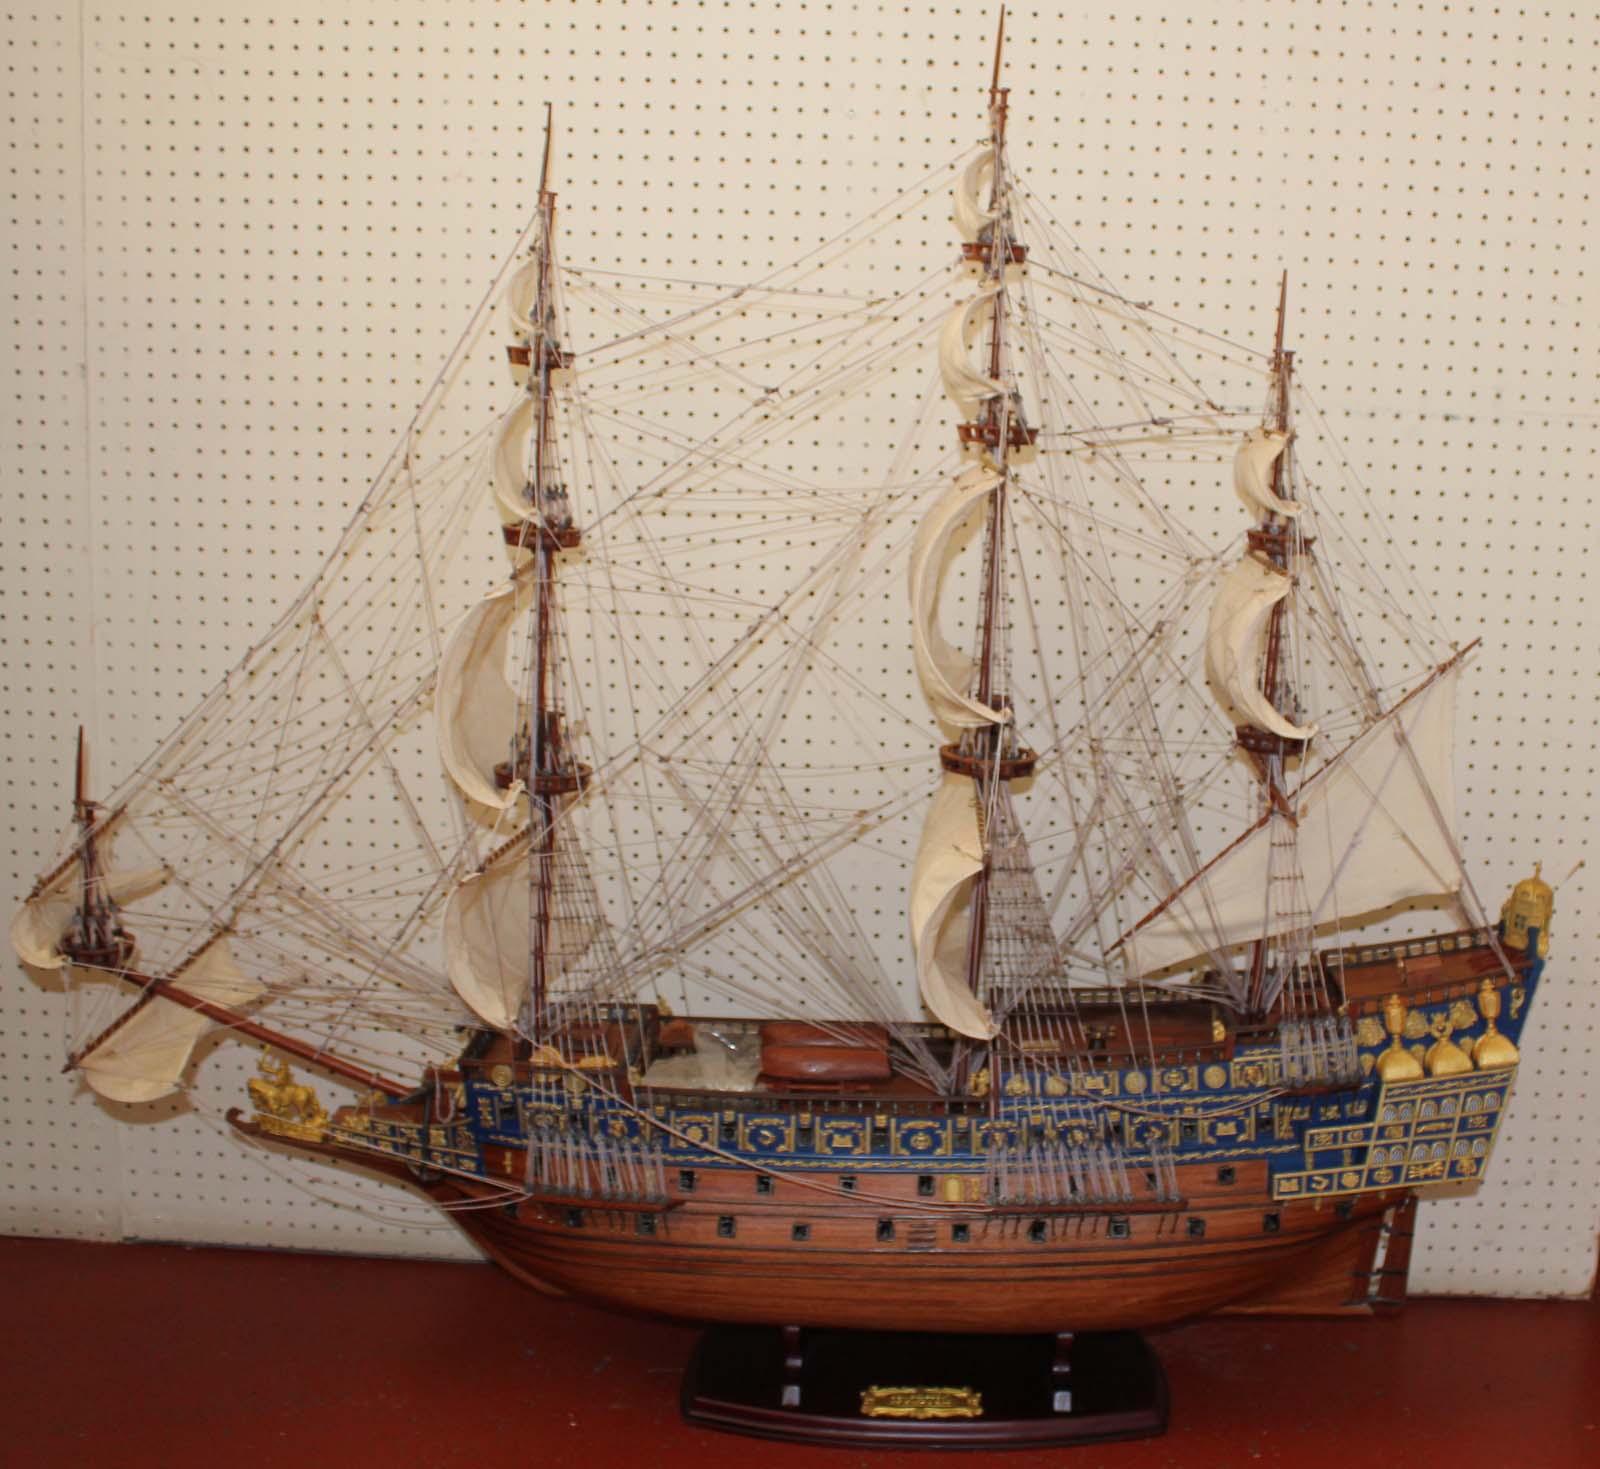 The Sovereign of the Seas, Model Galleon commissioned by Charles I with a full complement of